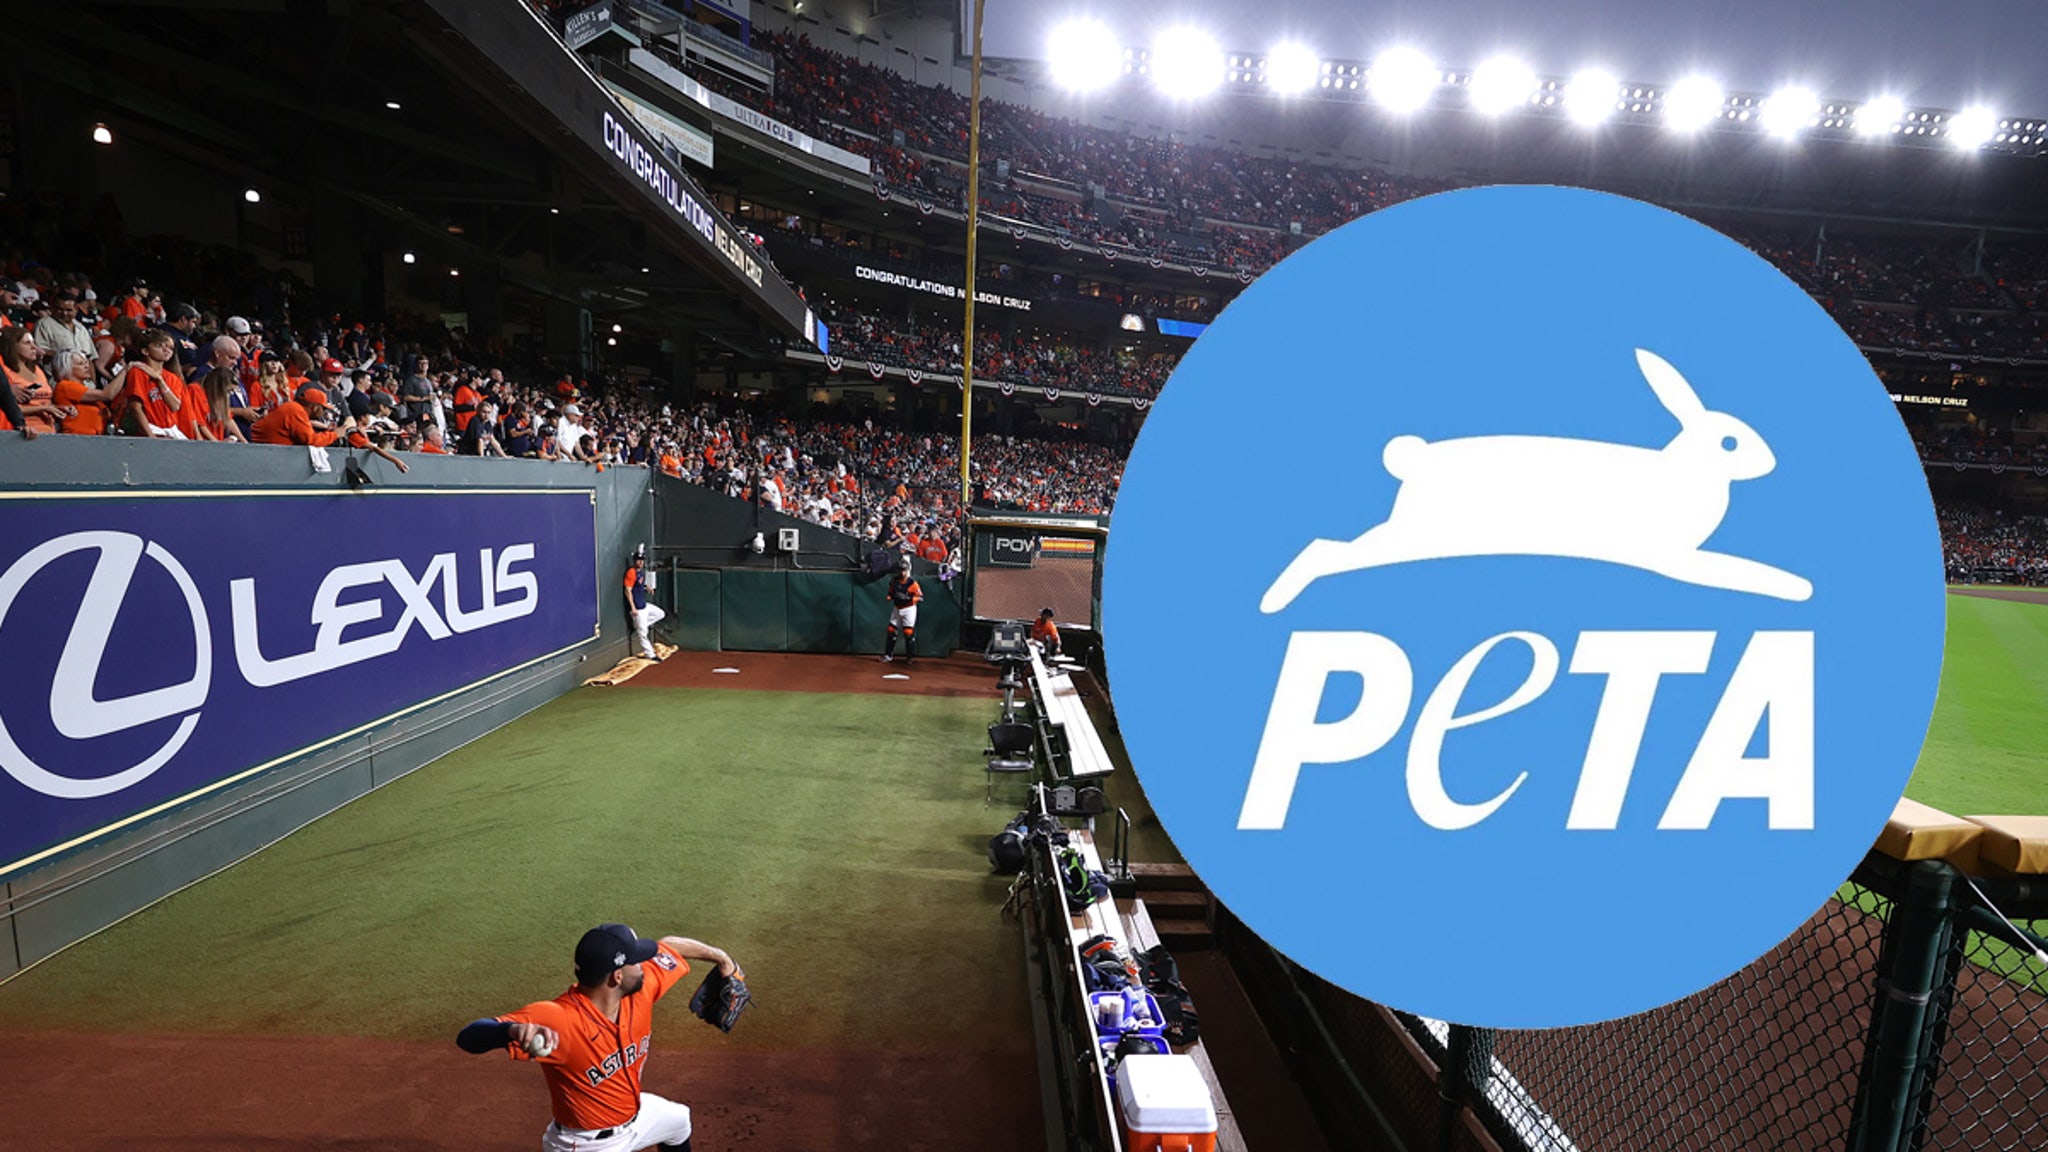 PETA Urging MLB To Rename 'Bullpen' To 'Arm Barn,' It's Insensitive To Cows!